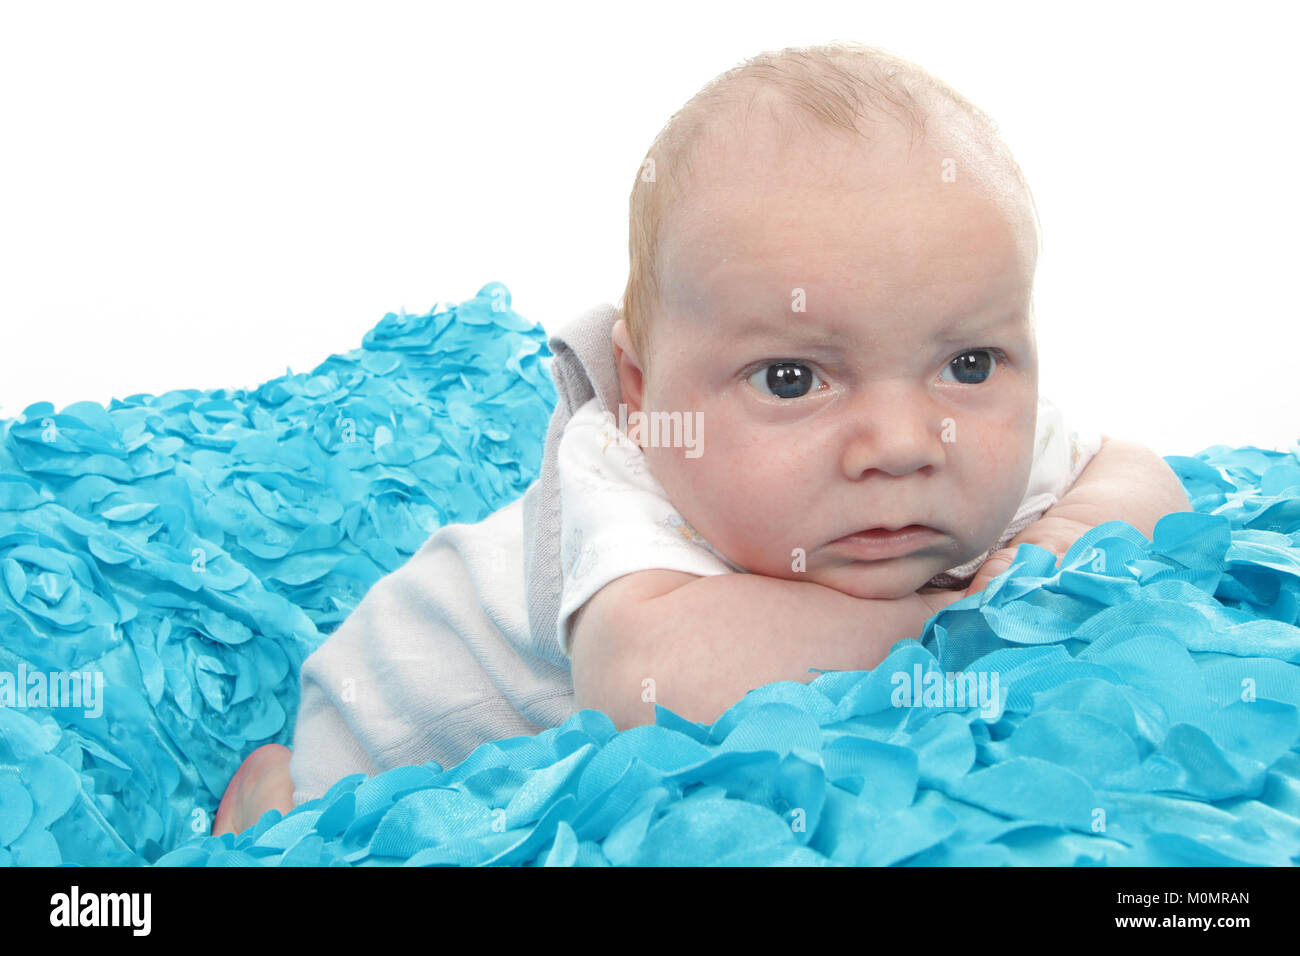 4 week old baby boy, 1 month old infant Stock Photo